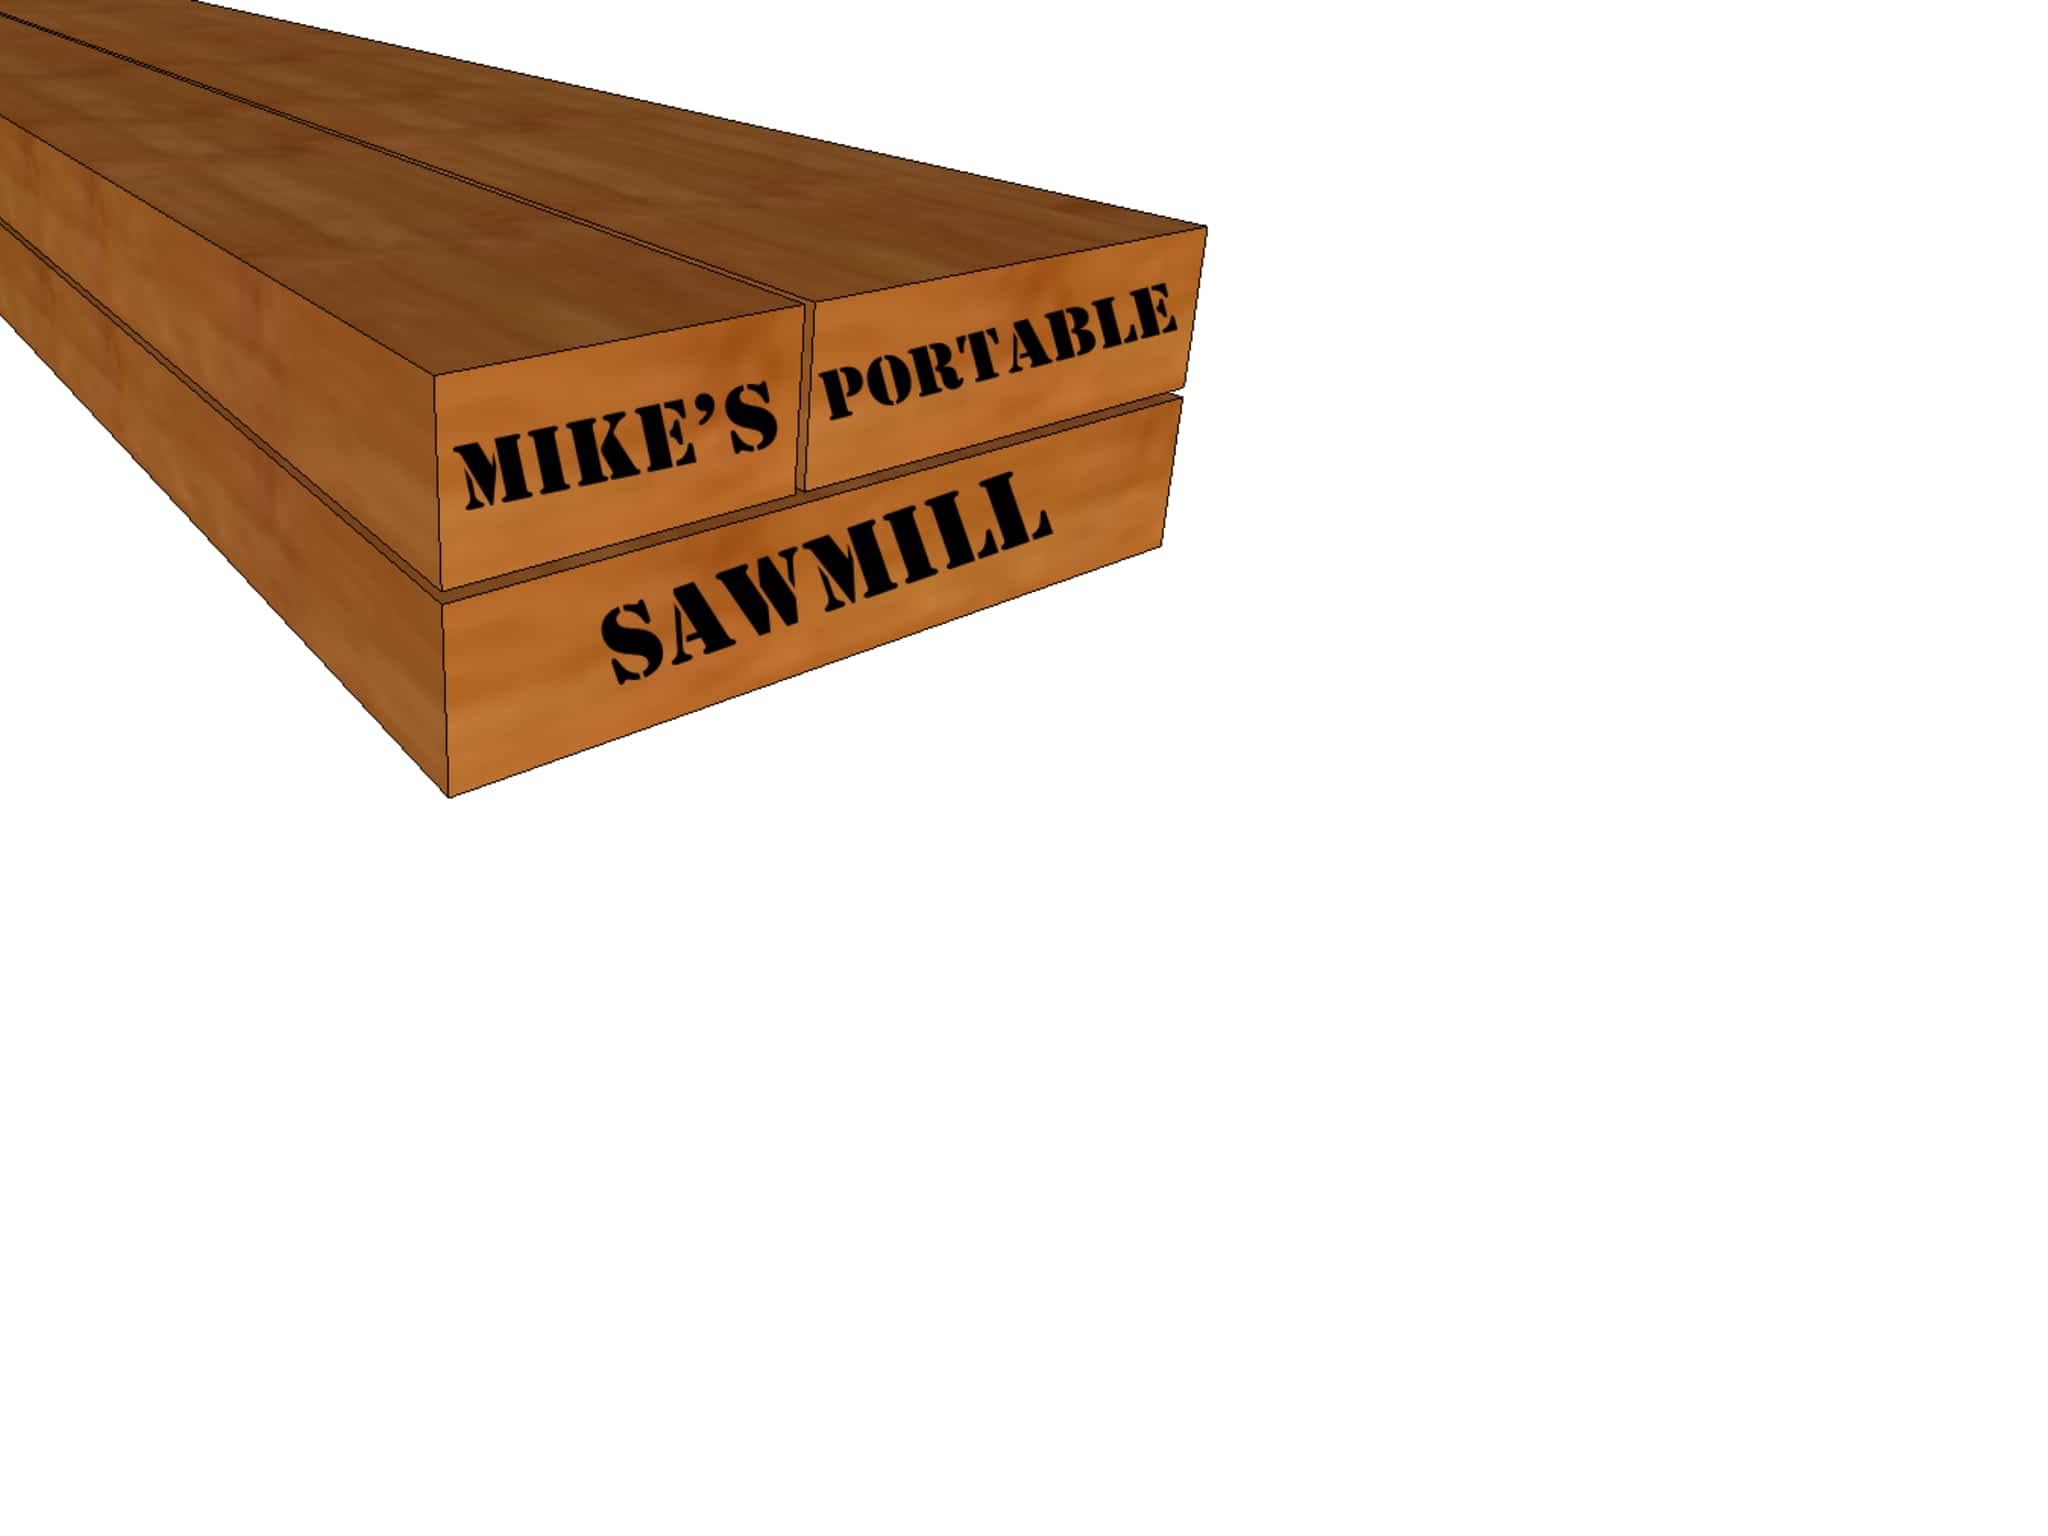 photo Mike's Portable Sawmill